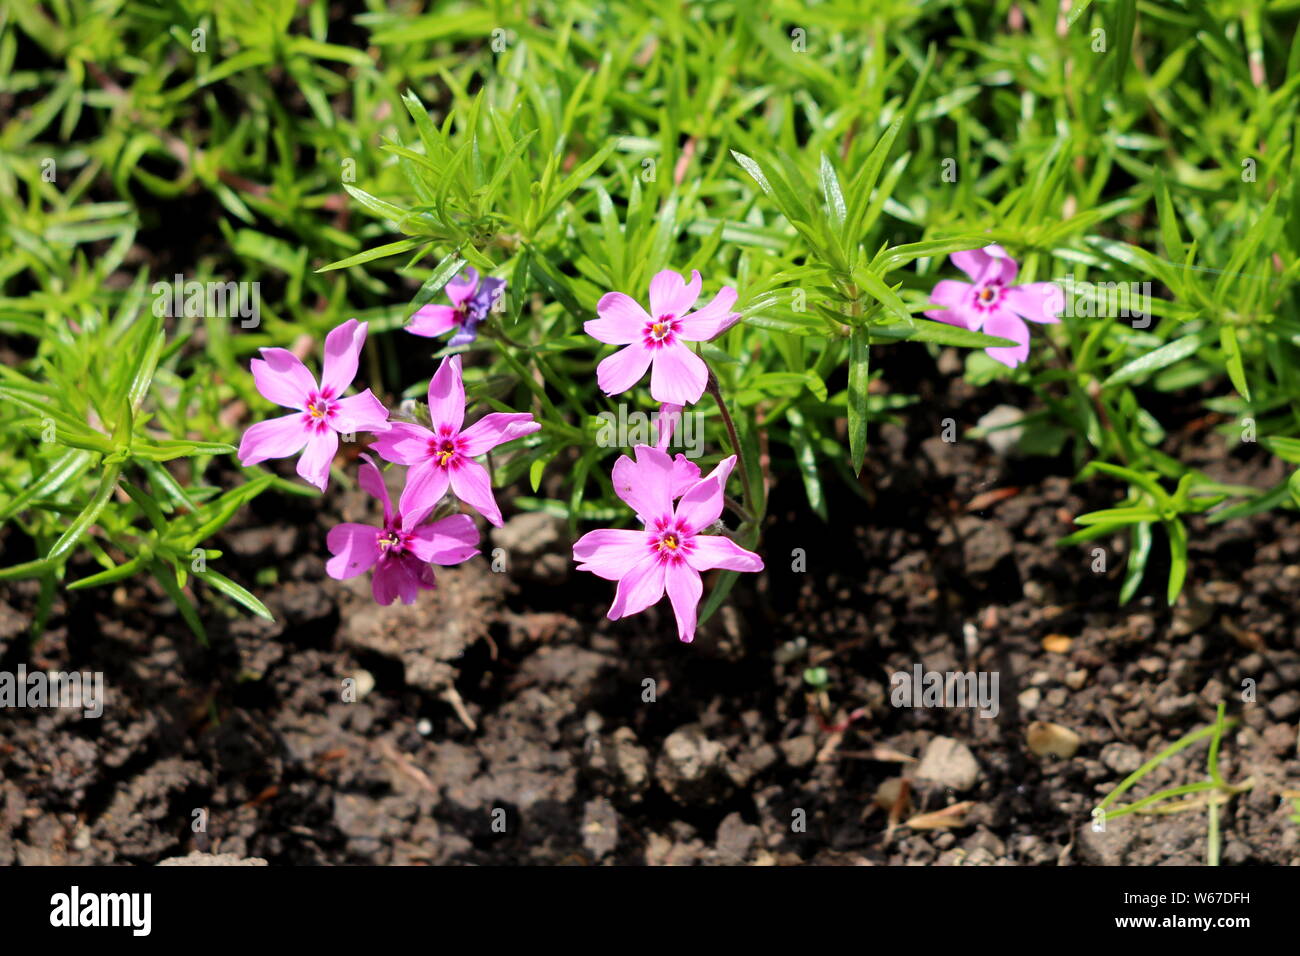 Creeping phlox or Phlox stolonifera or Moss phlox herbaceous stoloniferous perennial plants with pink flowers surrounded with narrow green leaves Stock Photo